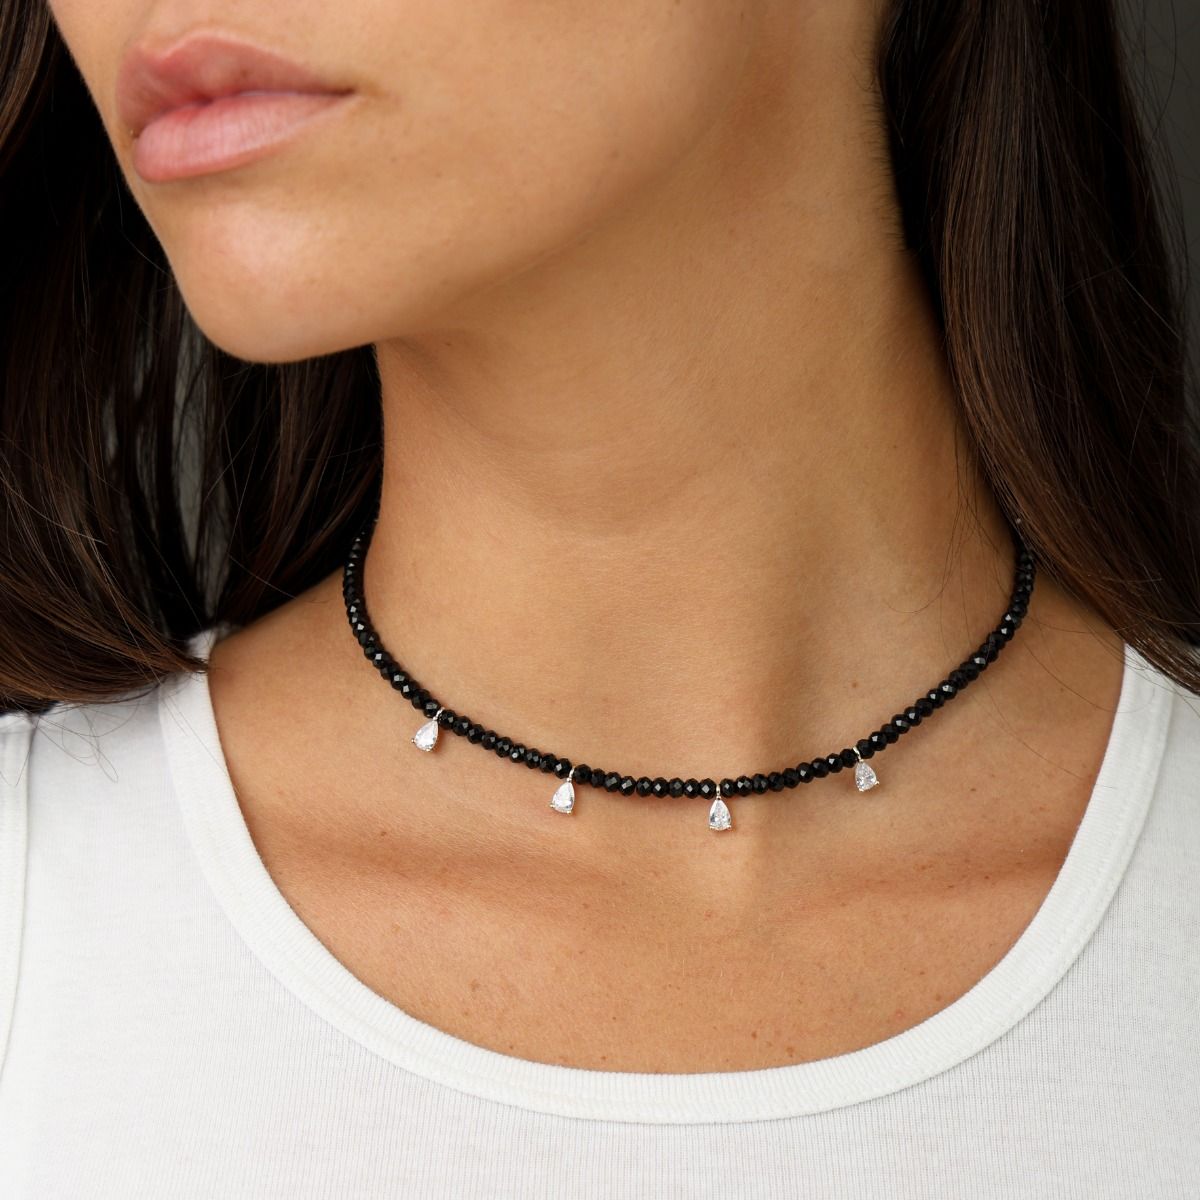 King Baby Long Black Spinel Necklace with White Pearls